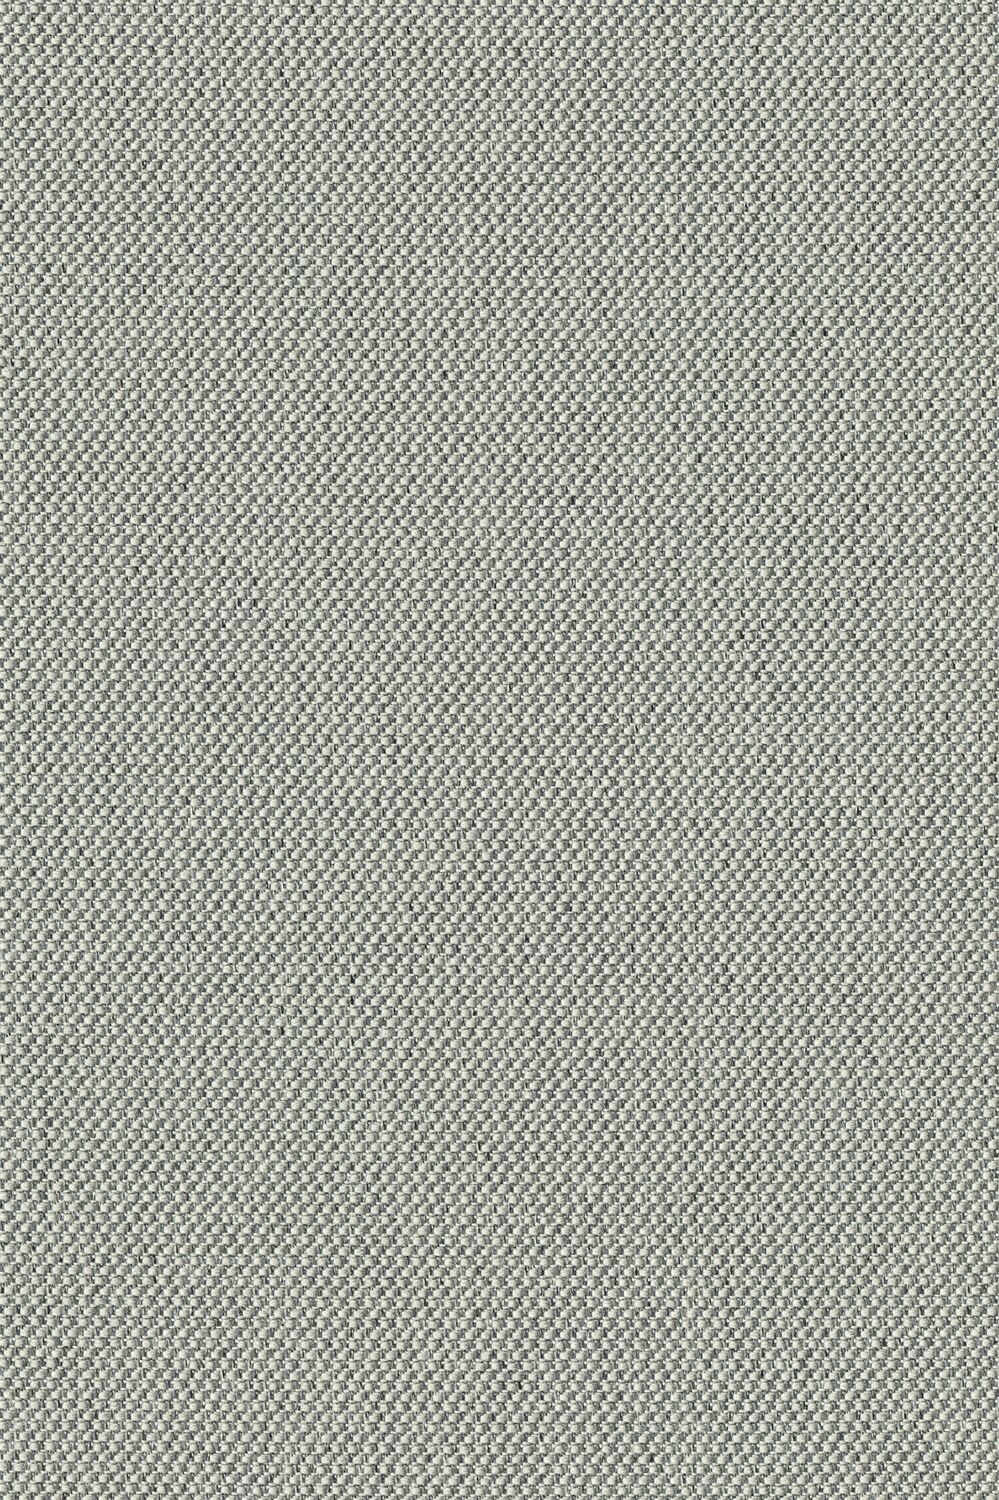 Biotope - Marine Snow - 4113 - 05 Tileable Swatches